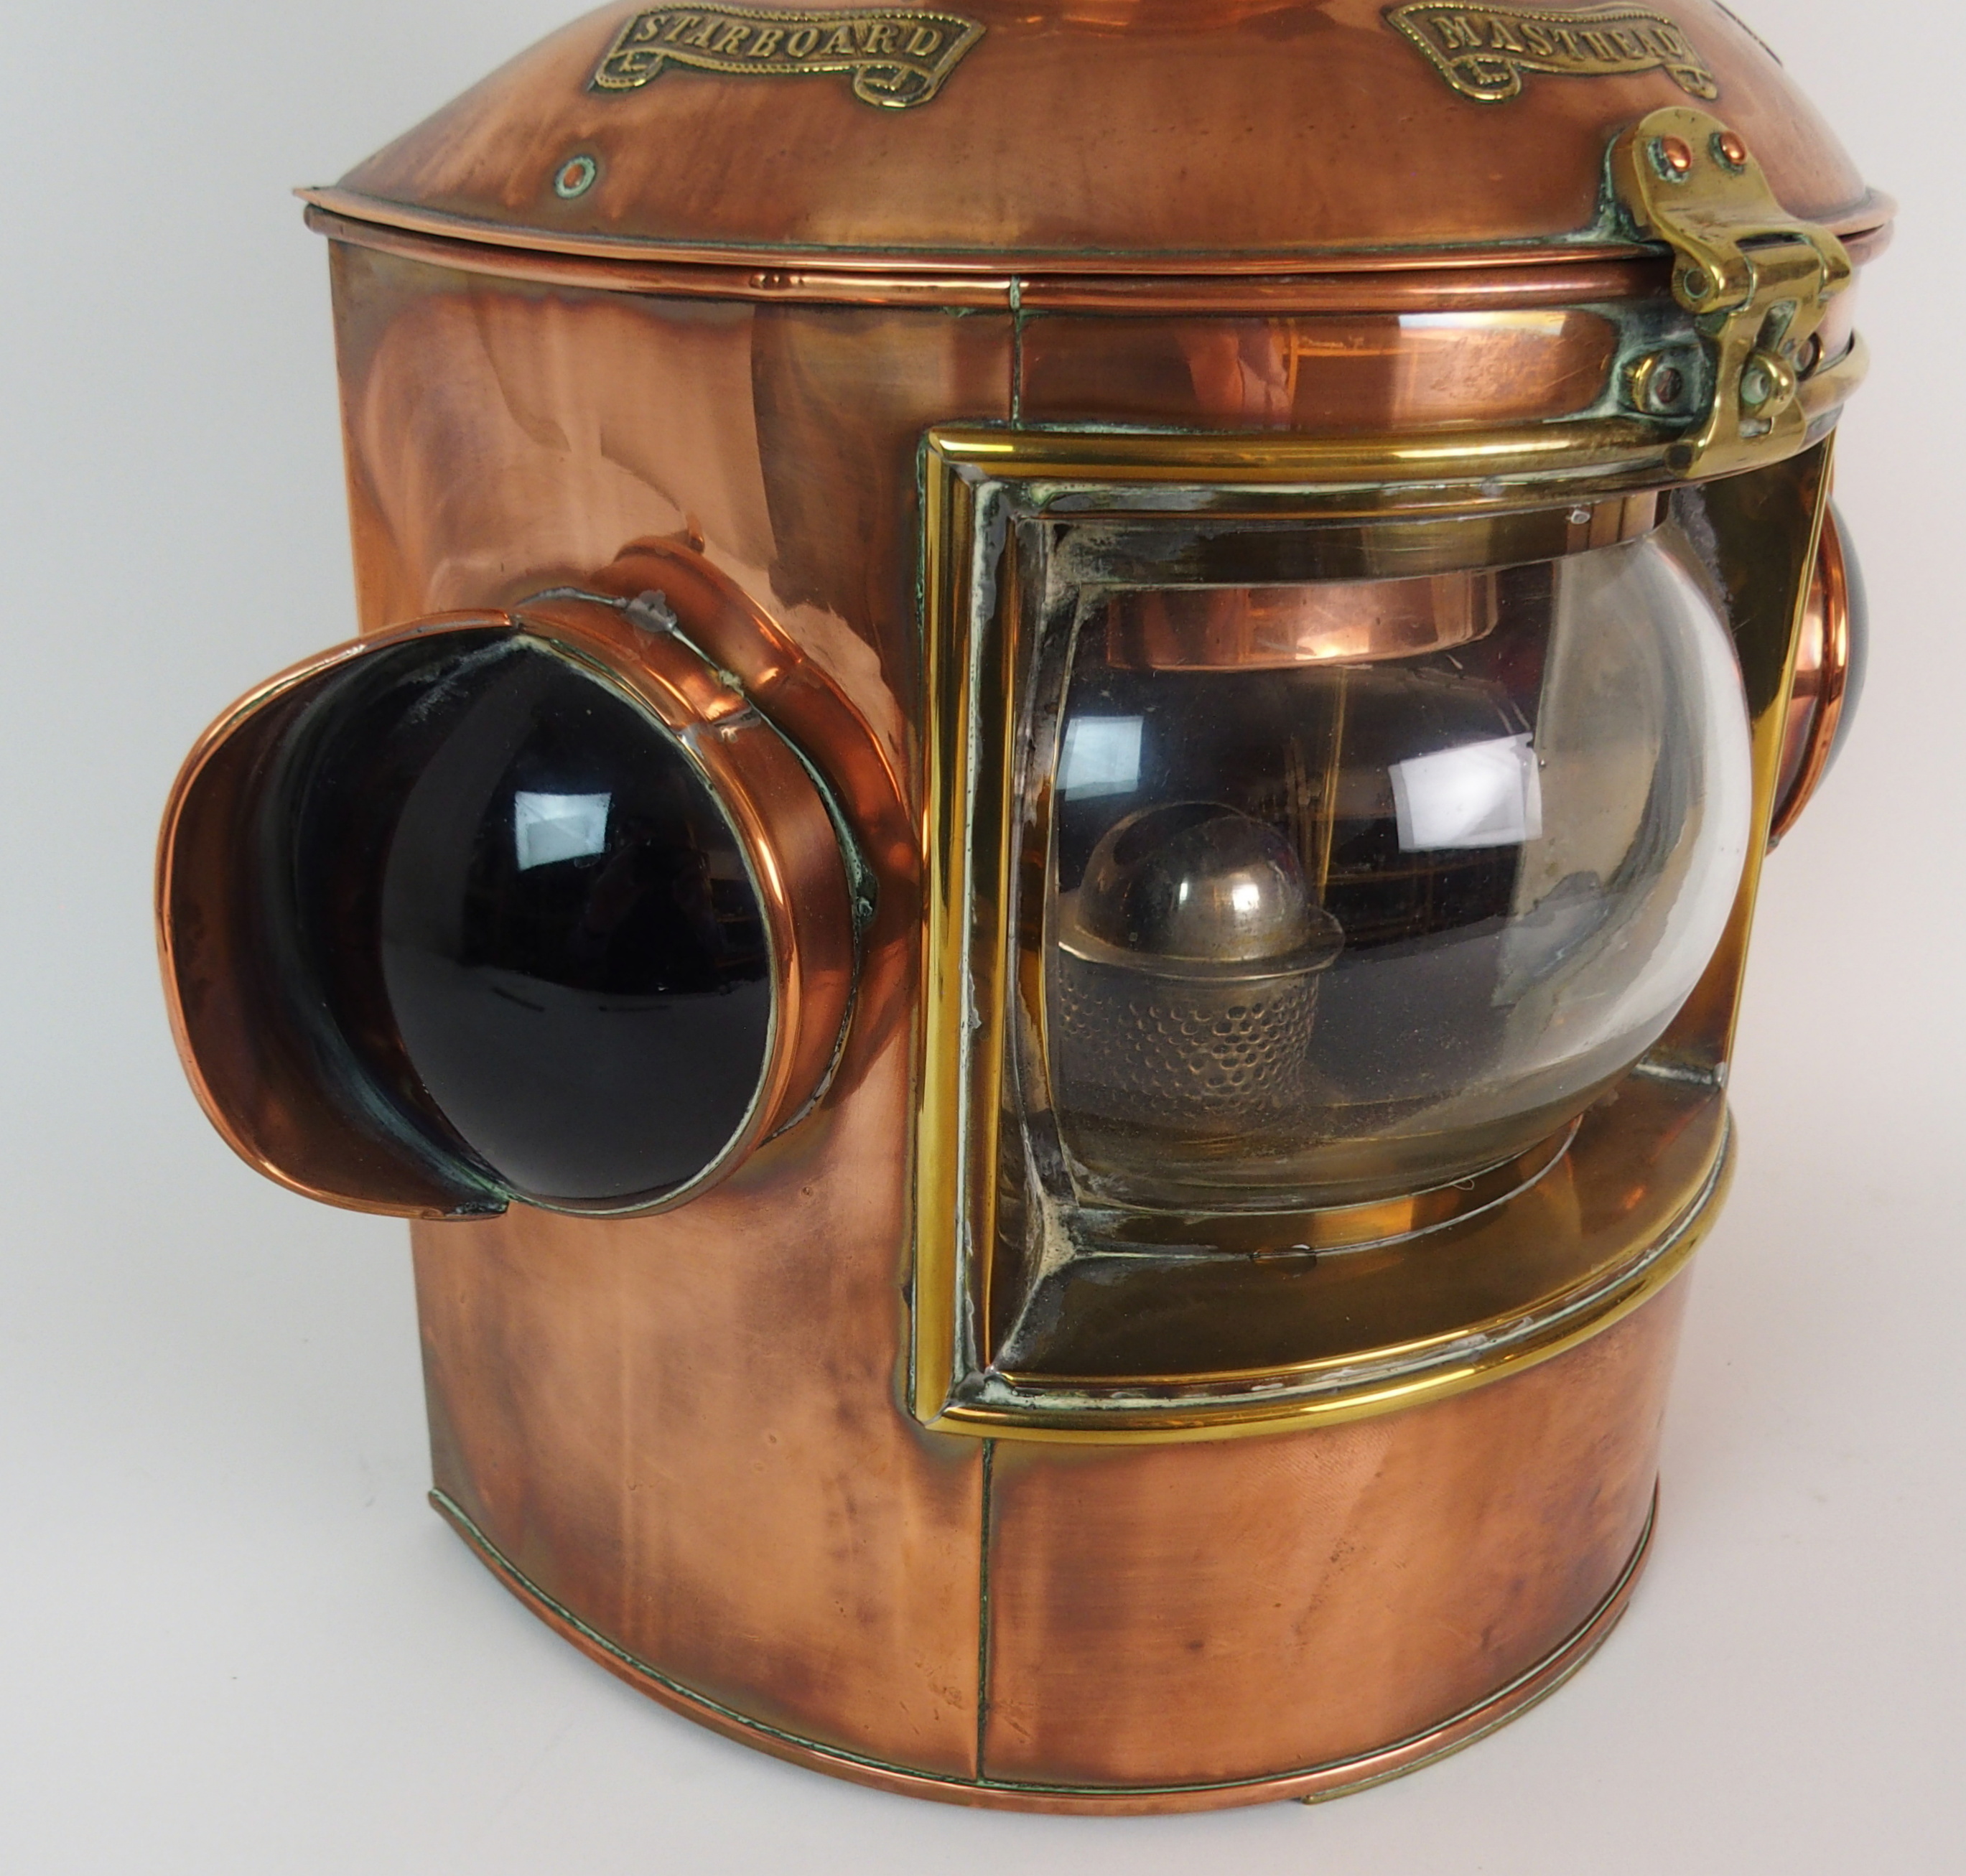 A VICTORIAN COPPER PORT & STARBOARD SHIPS LANTERN with hinged top and swing handle, with interior - Image 4 of 10